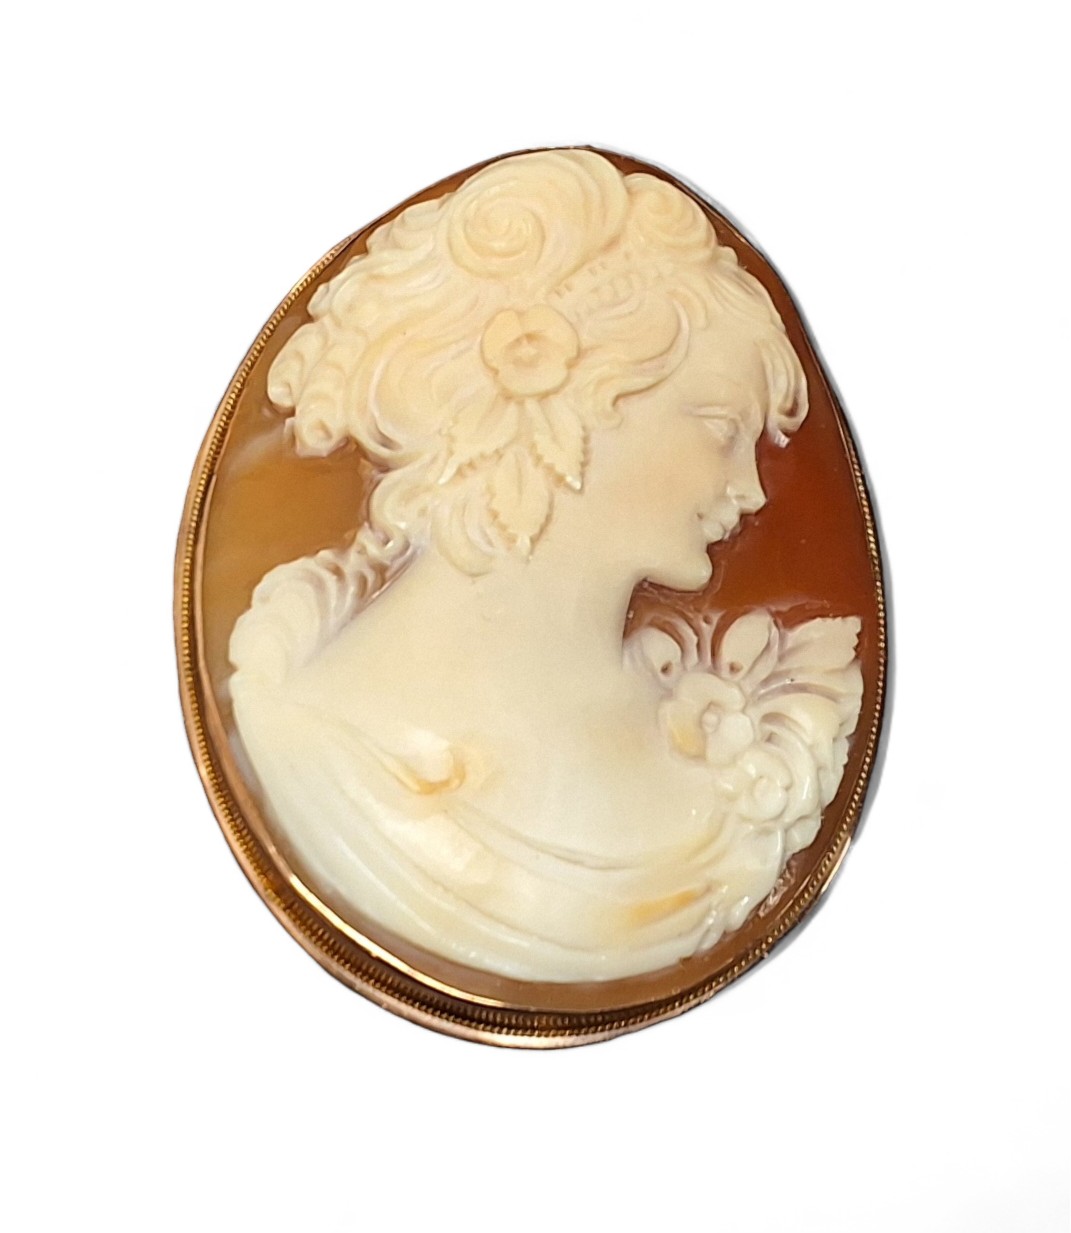 A Neapolitan 9ct rose gold mounted cameo brooch/pendant, the cameo depicting an elegant lady, approx